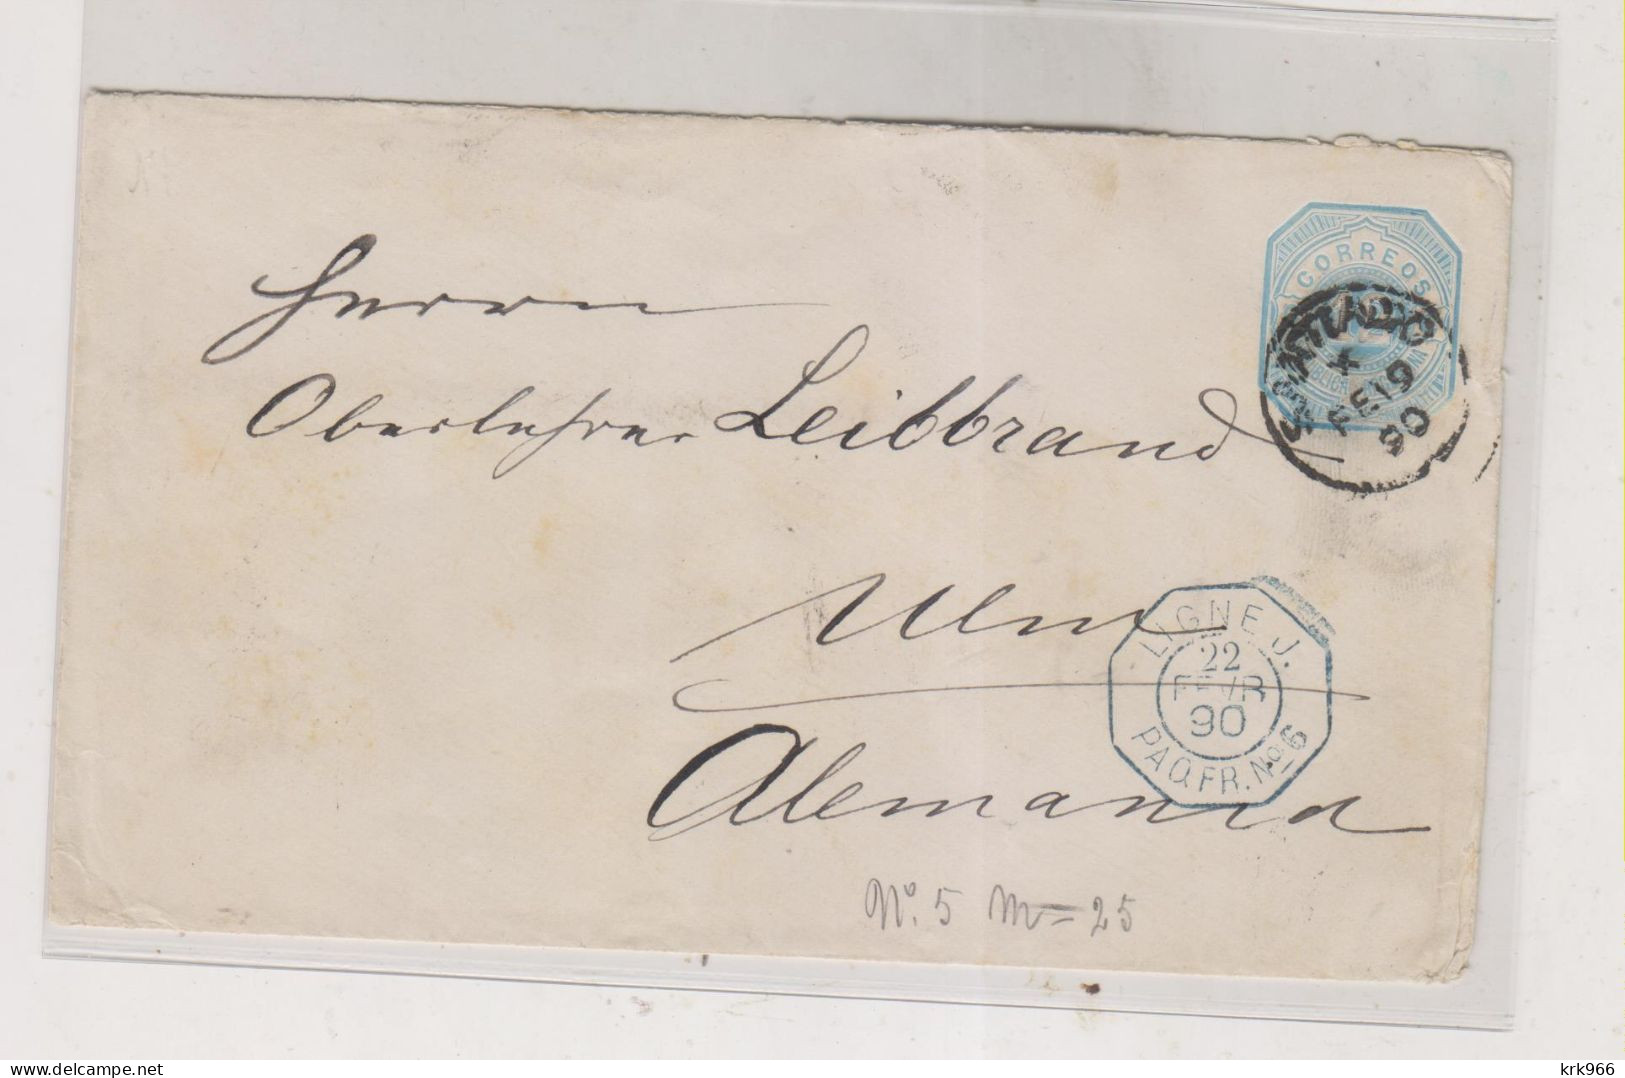 ARGENTINA 1890 SANTIAGO Nice Postal Stationery Cover To Germany - Ganzsachen